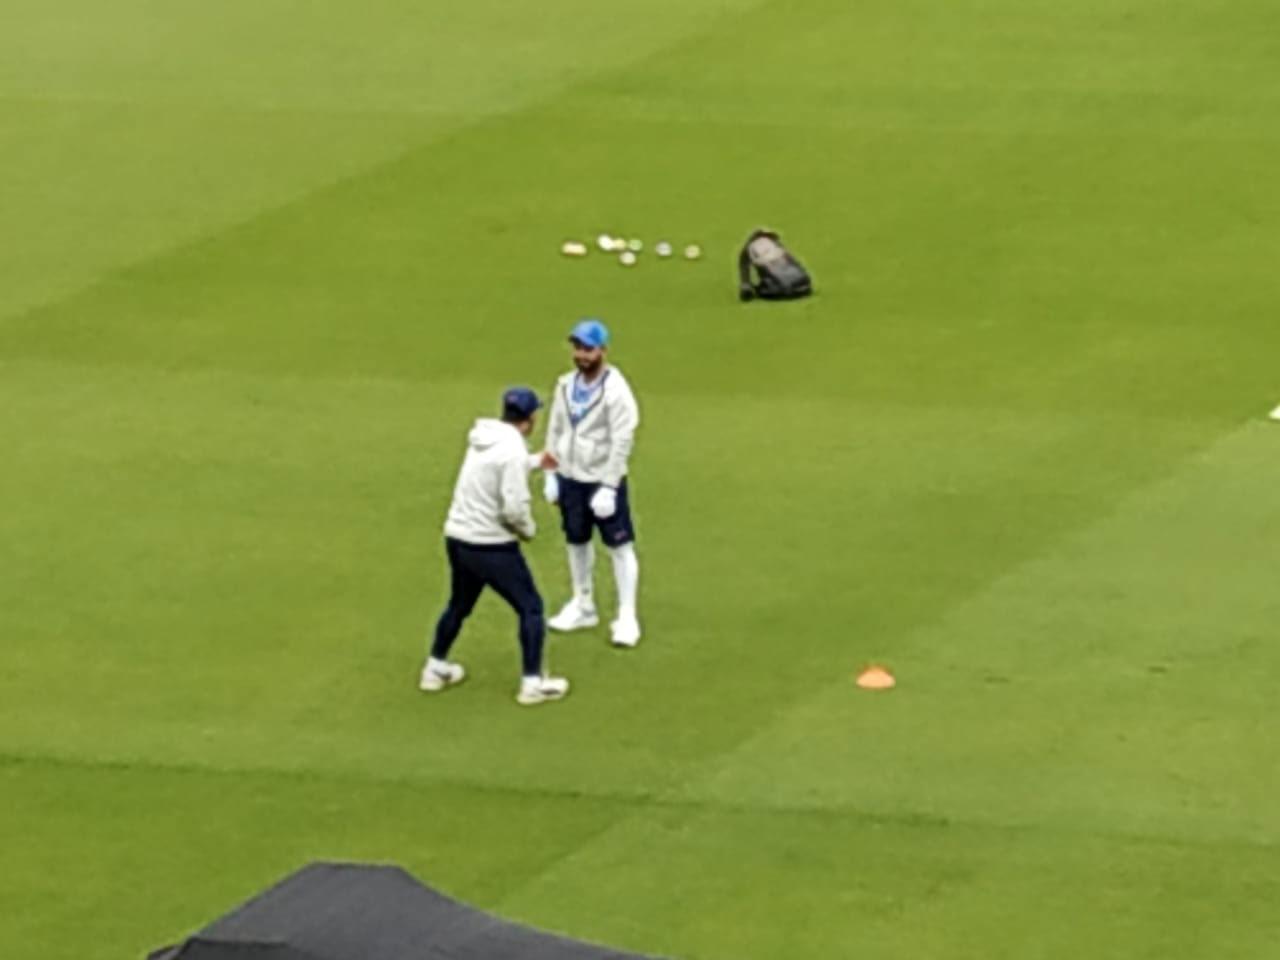 Training hard and training well is very important as raining doesn't just help a player improve his fitness but also helps him divert his focus from performance pressures when they are expected to play an important role during the match.